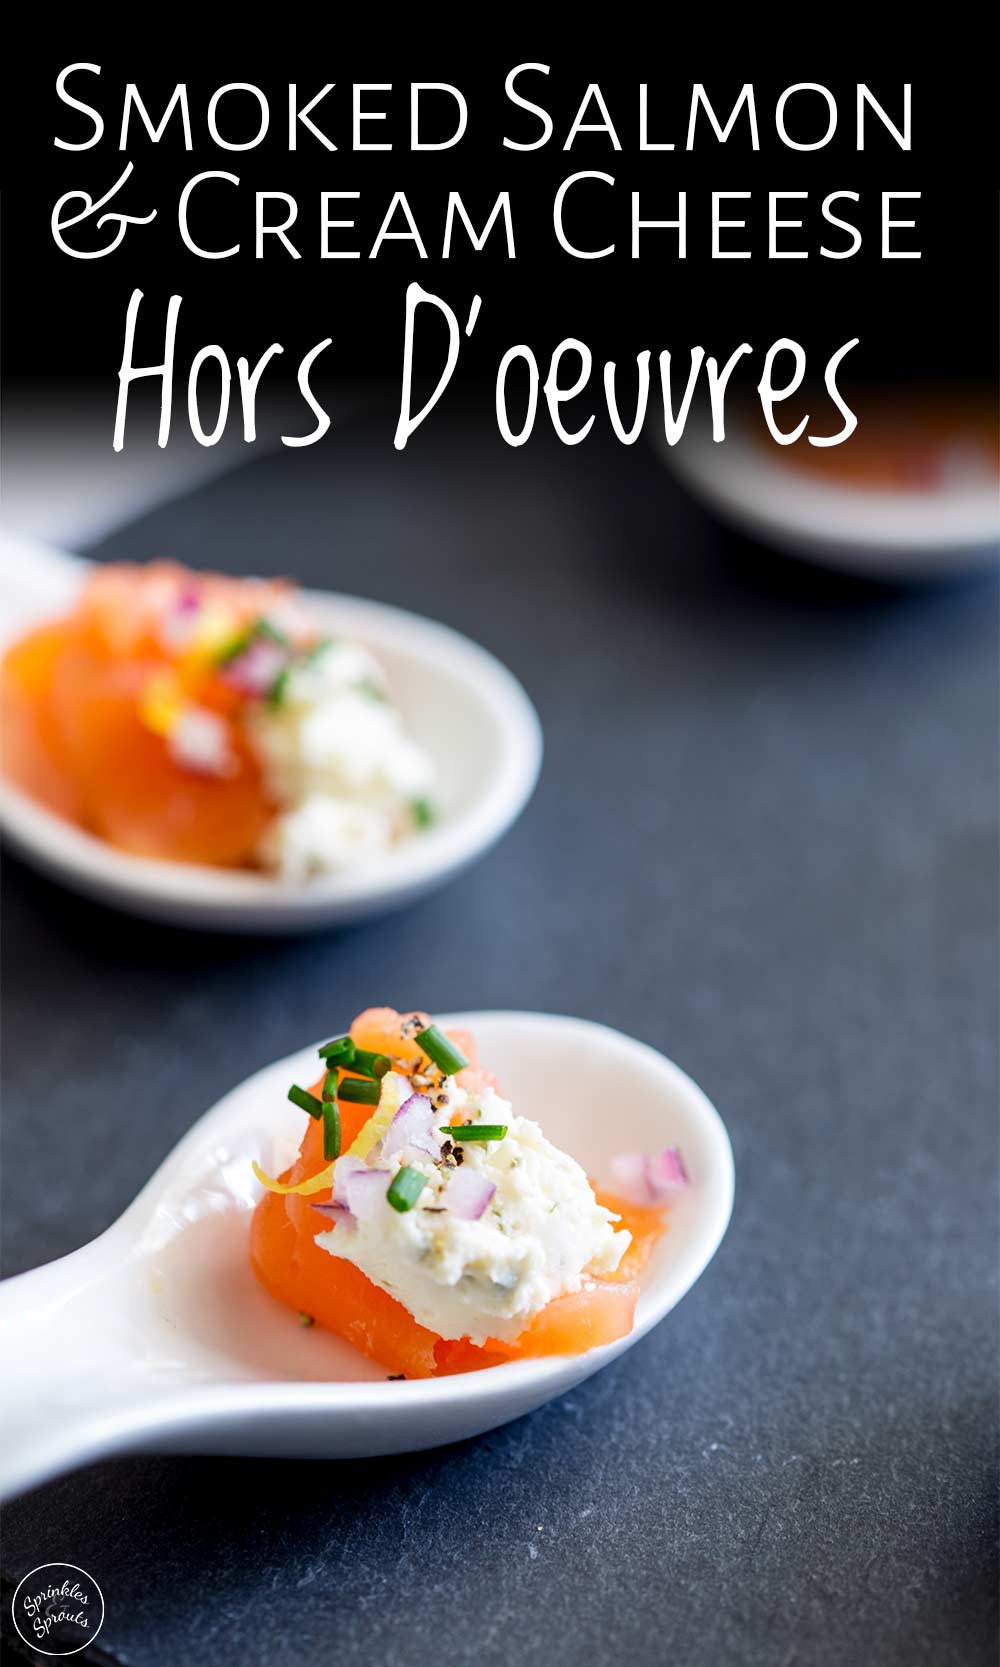 Smoked salmon and cream cheese hors d'oeuvres with text at the top